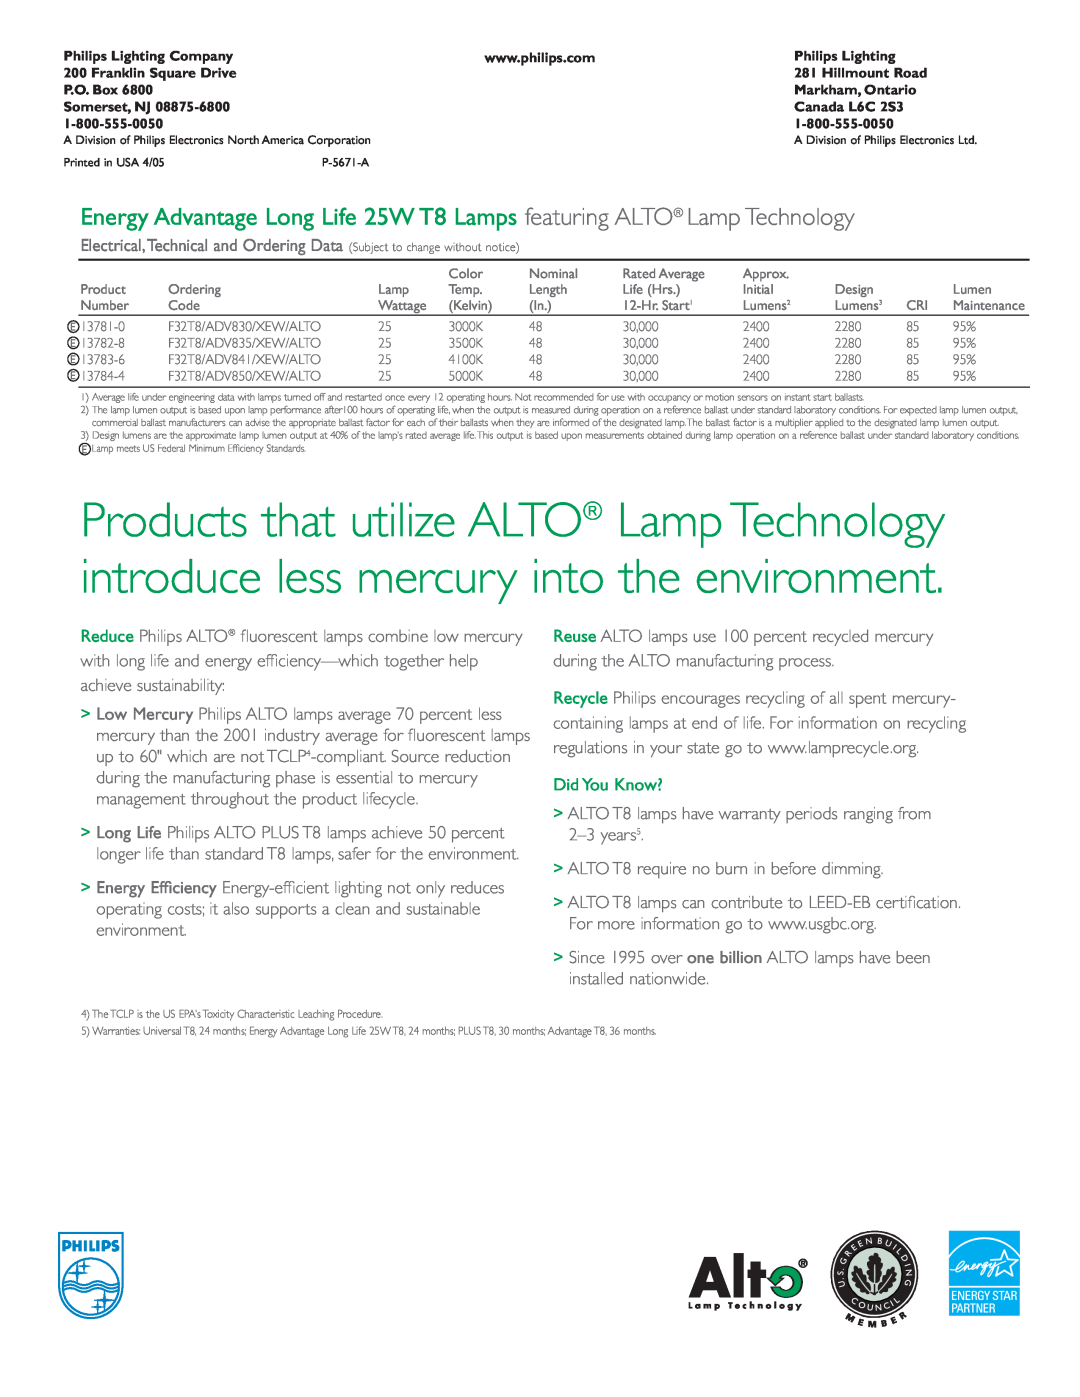 Philips 25W T8 Lamps manual Did You Know?, ALTO T8 require no burn in before dimming 